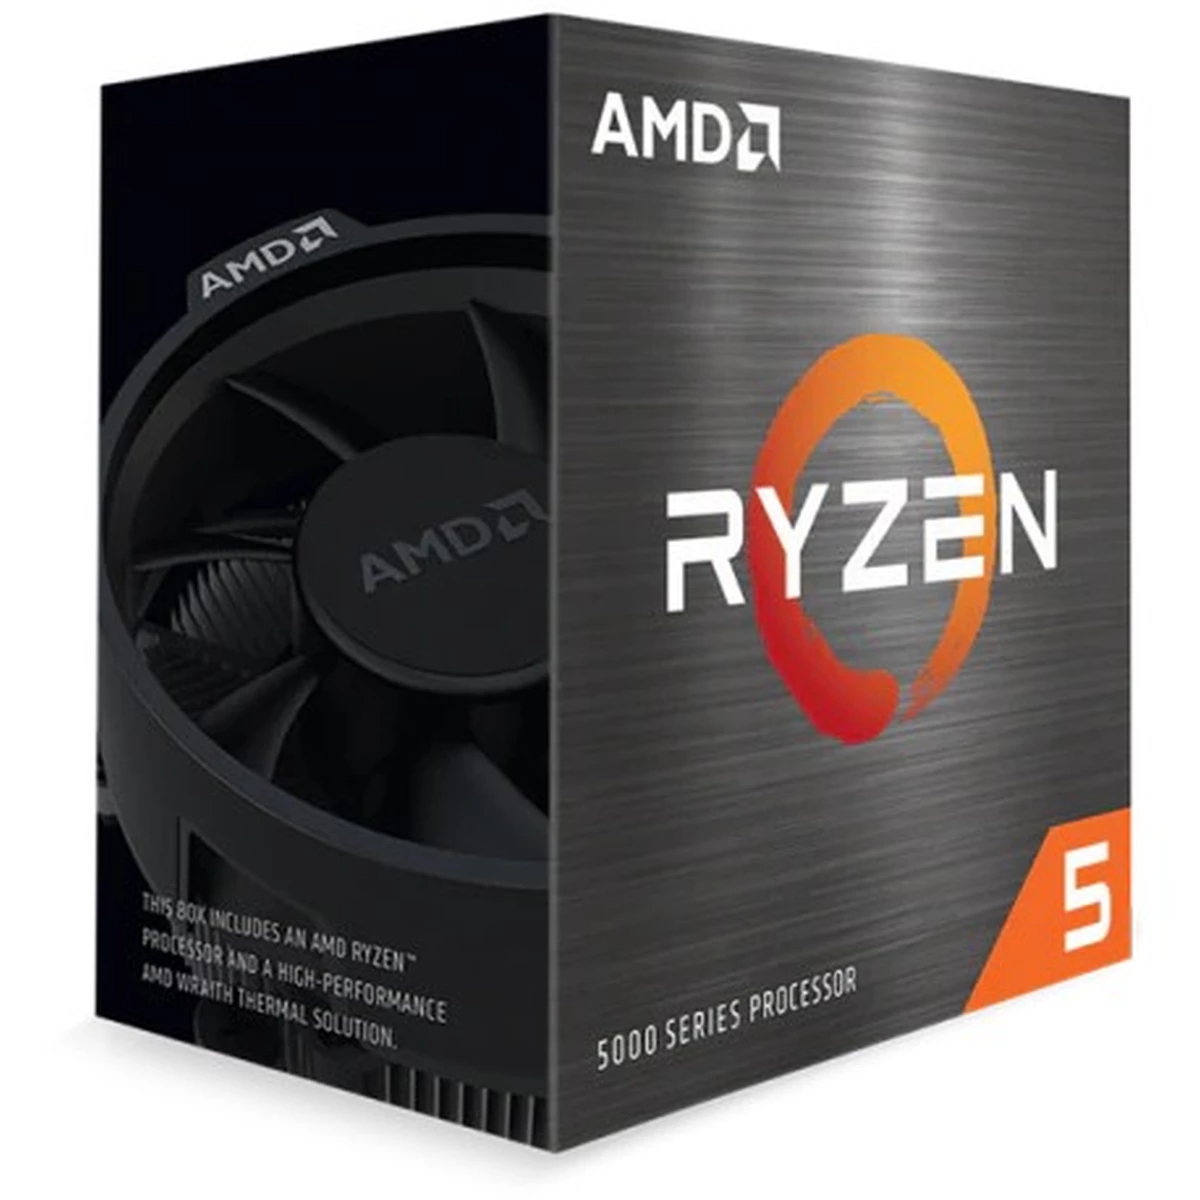 AMD Ryzen 5 5600G Box 3,9 GHz up to 4,4GHz AM4 6xCore 16MB 65W with Radeon Graphics with Wraith Stealth Cooler Zen 3